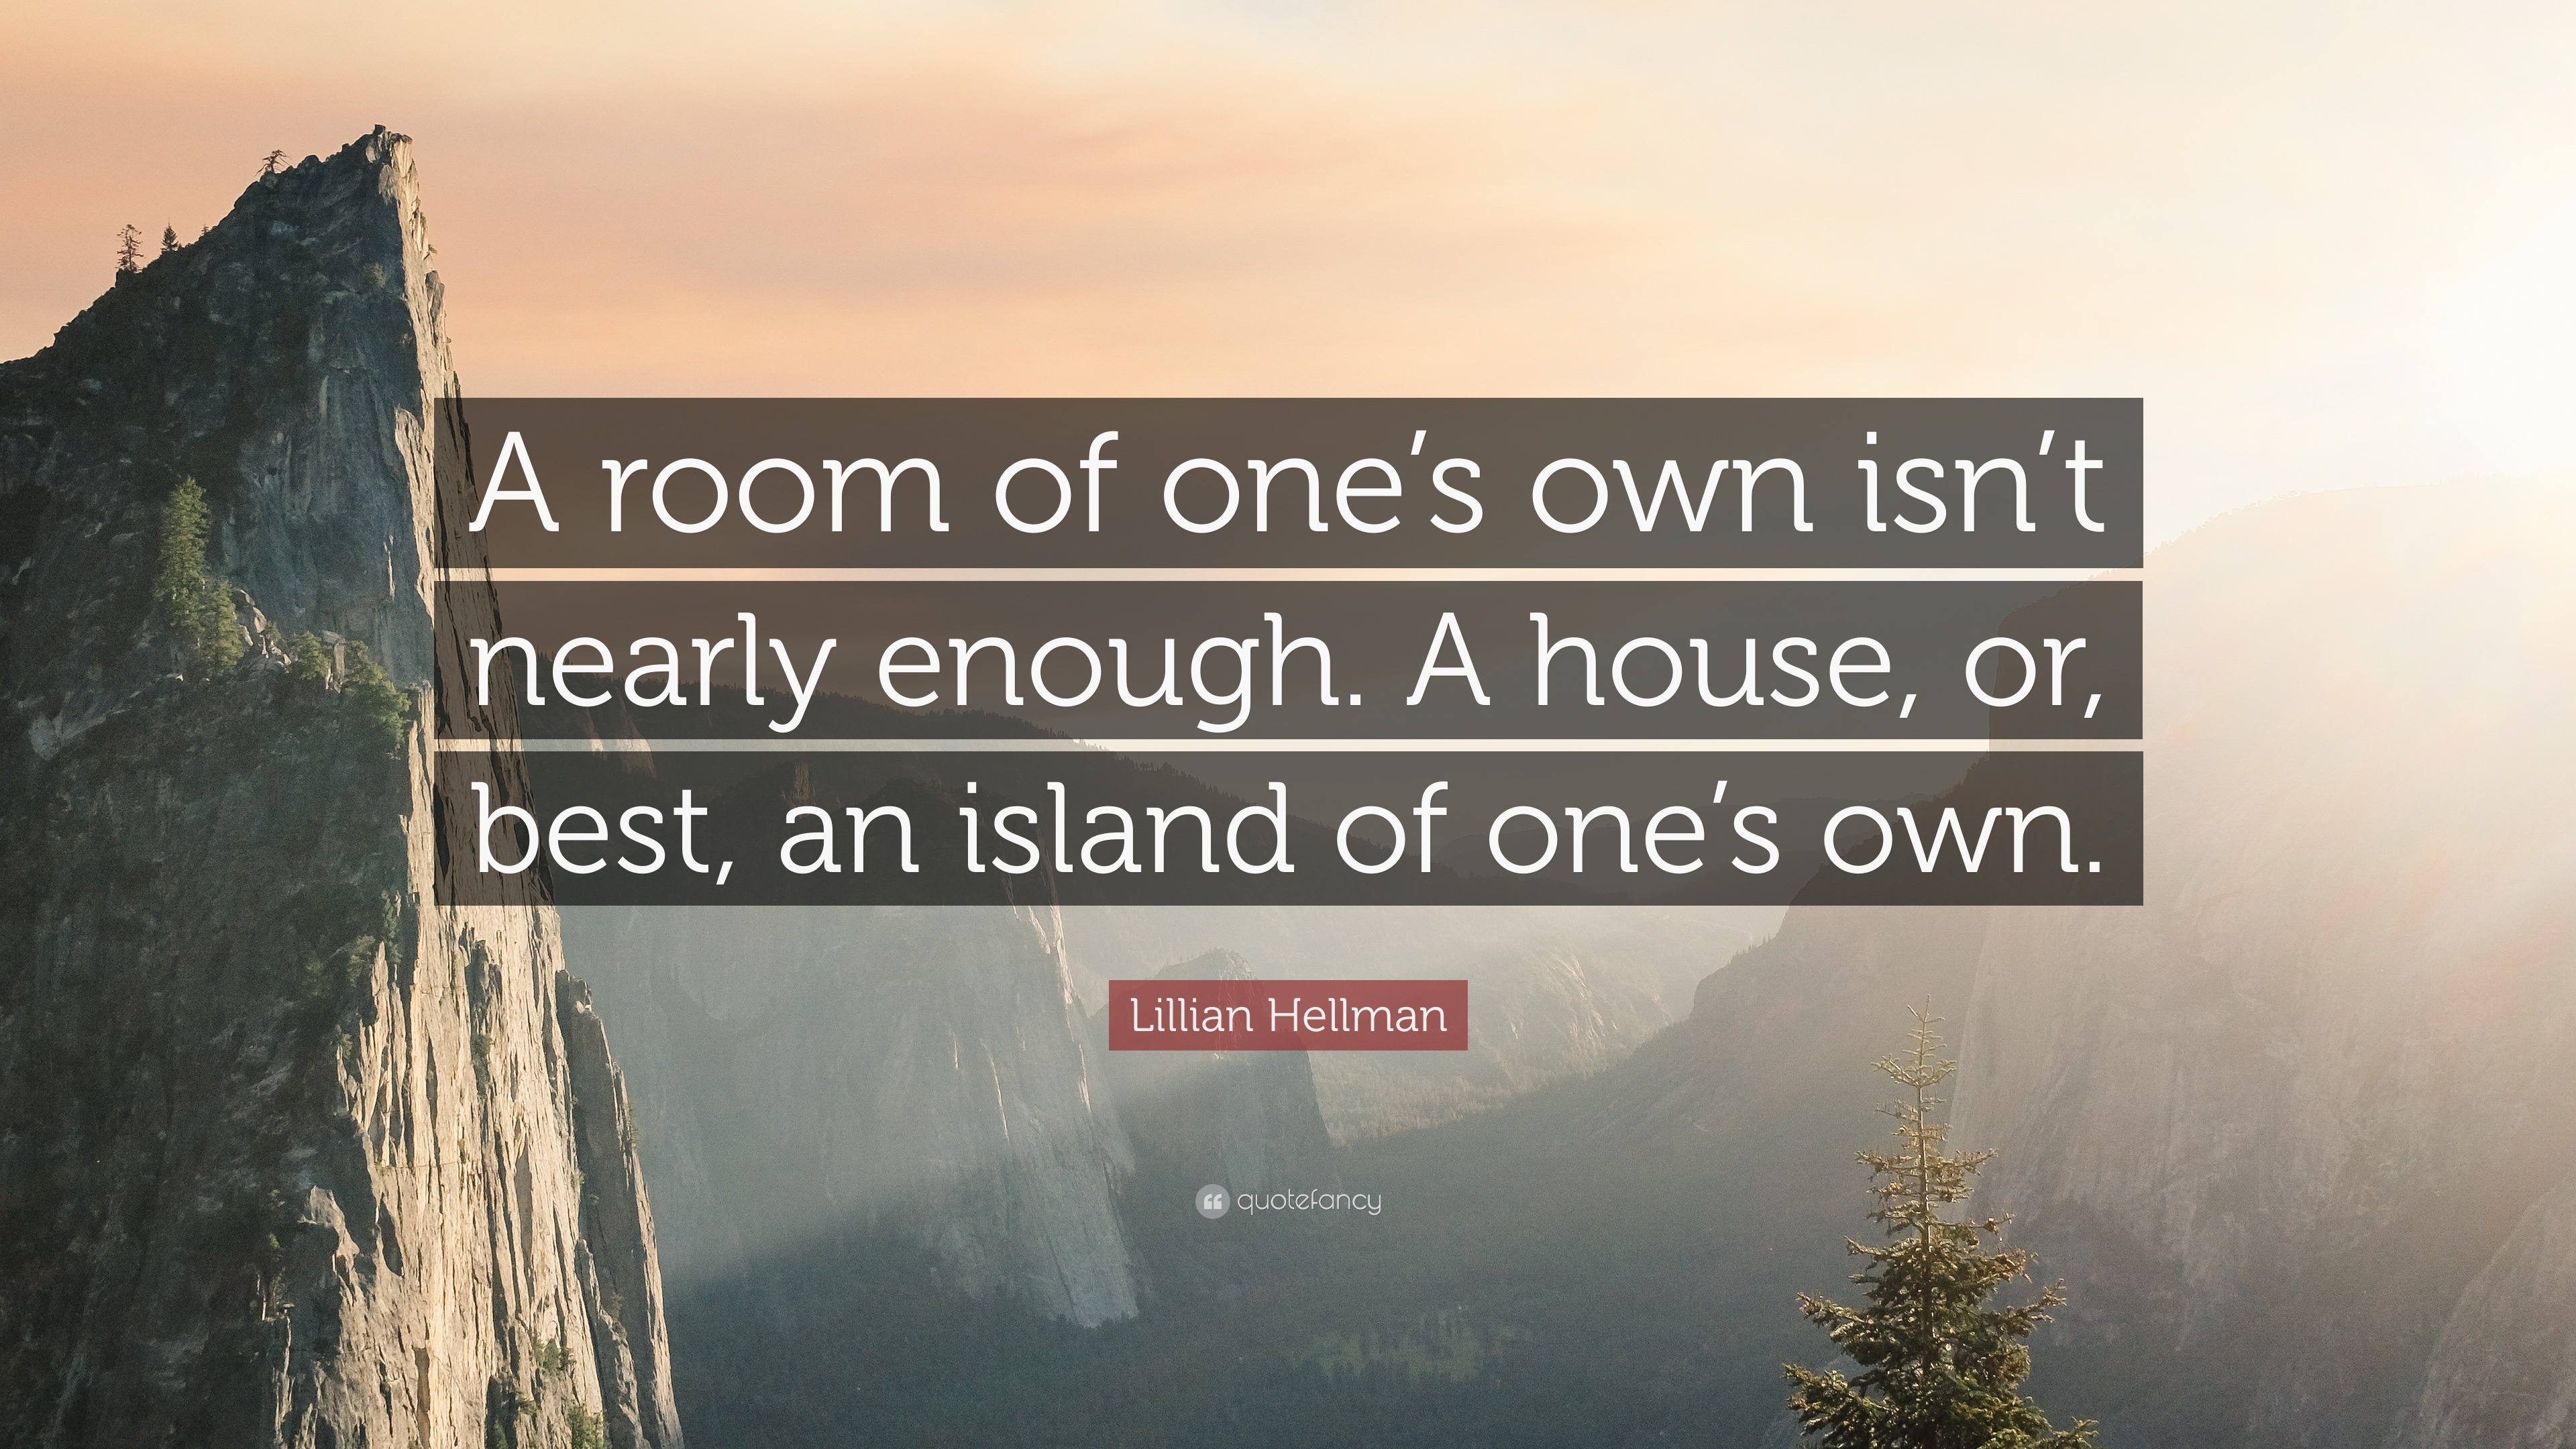 Lillian Hellman Quote: “A room of one’s own isn’t nearly enough. A ...